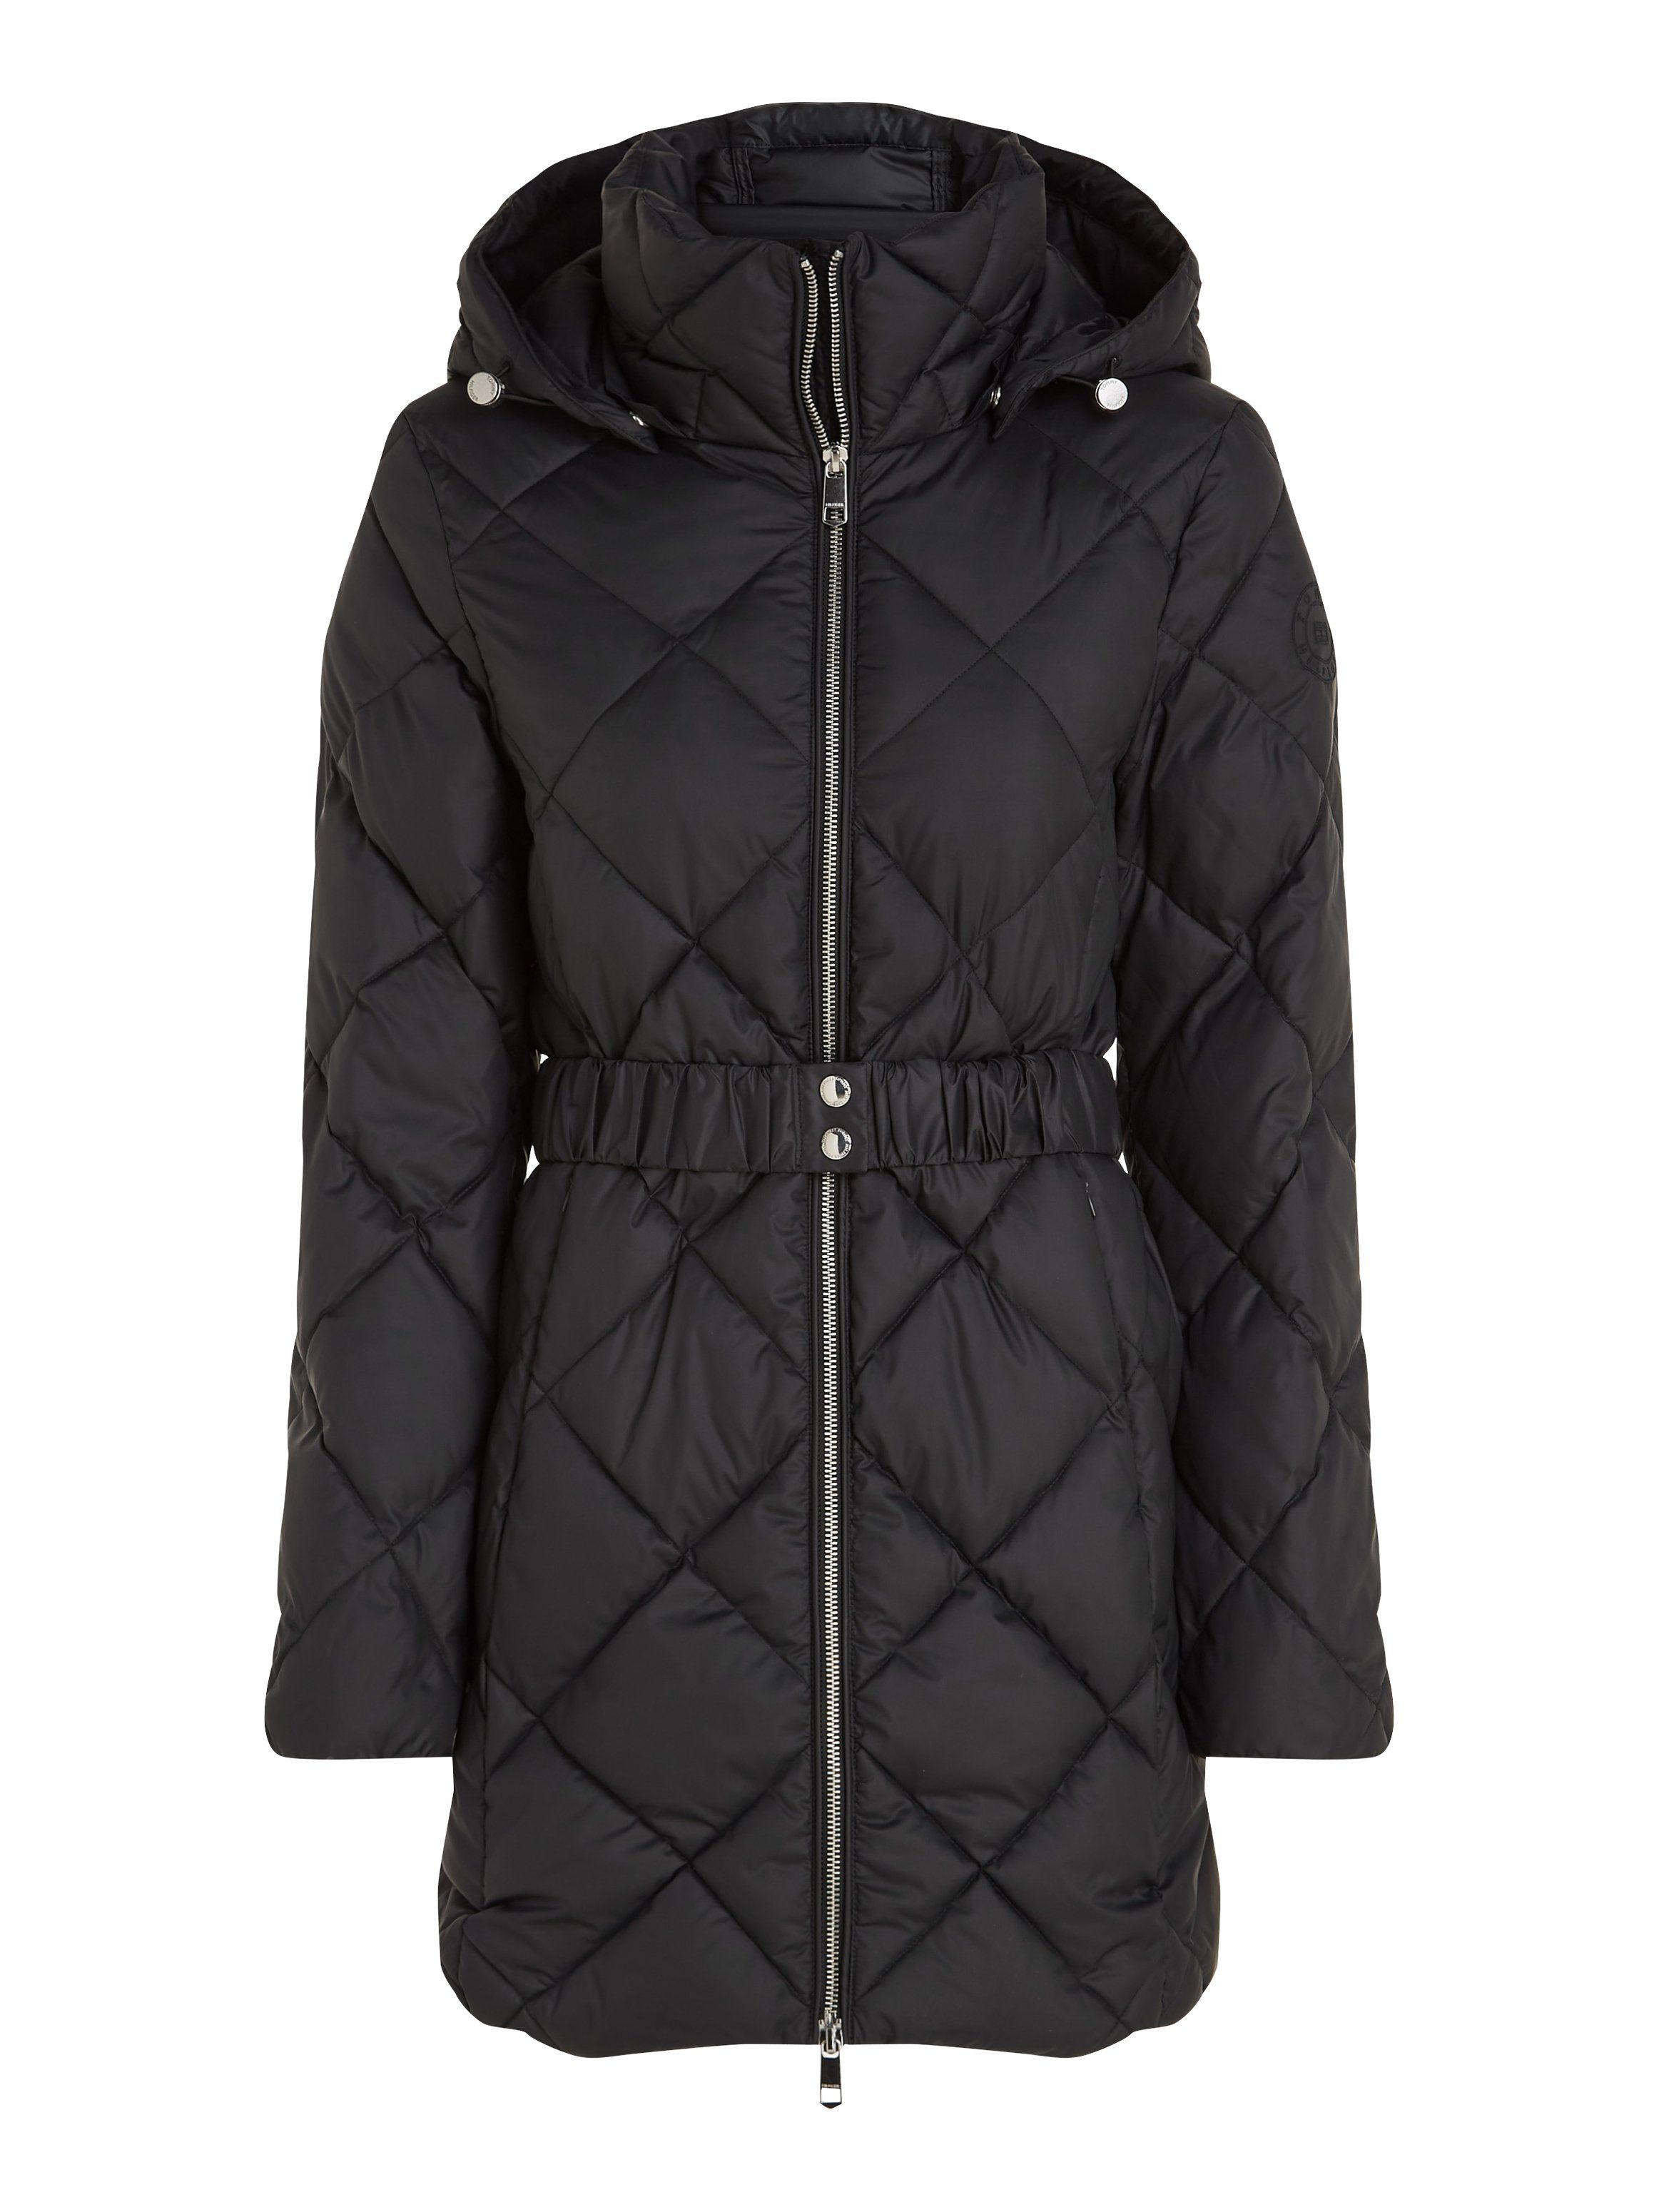 COAT ELEVATED Tommy abnehmbarer Hilfiger mit Kapuze BELTED QUILTED Steppmantel